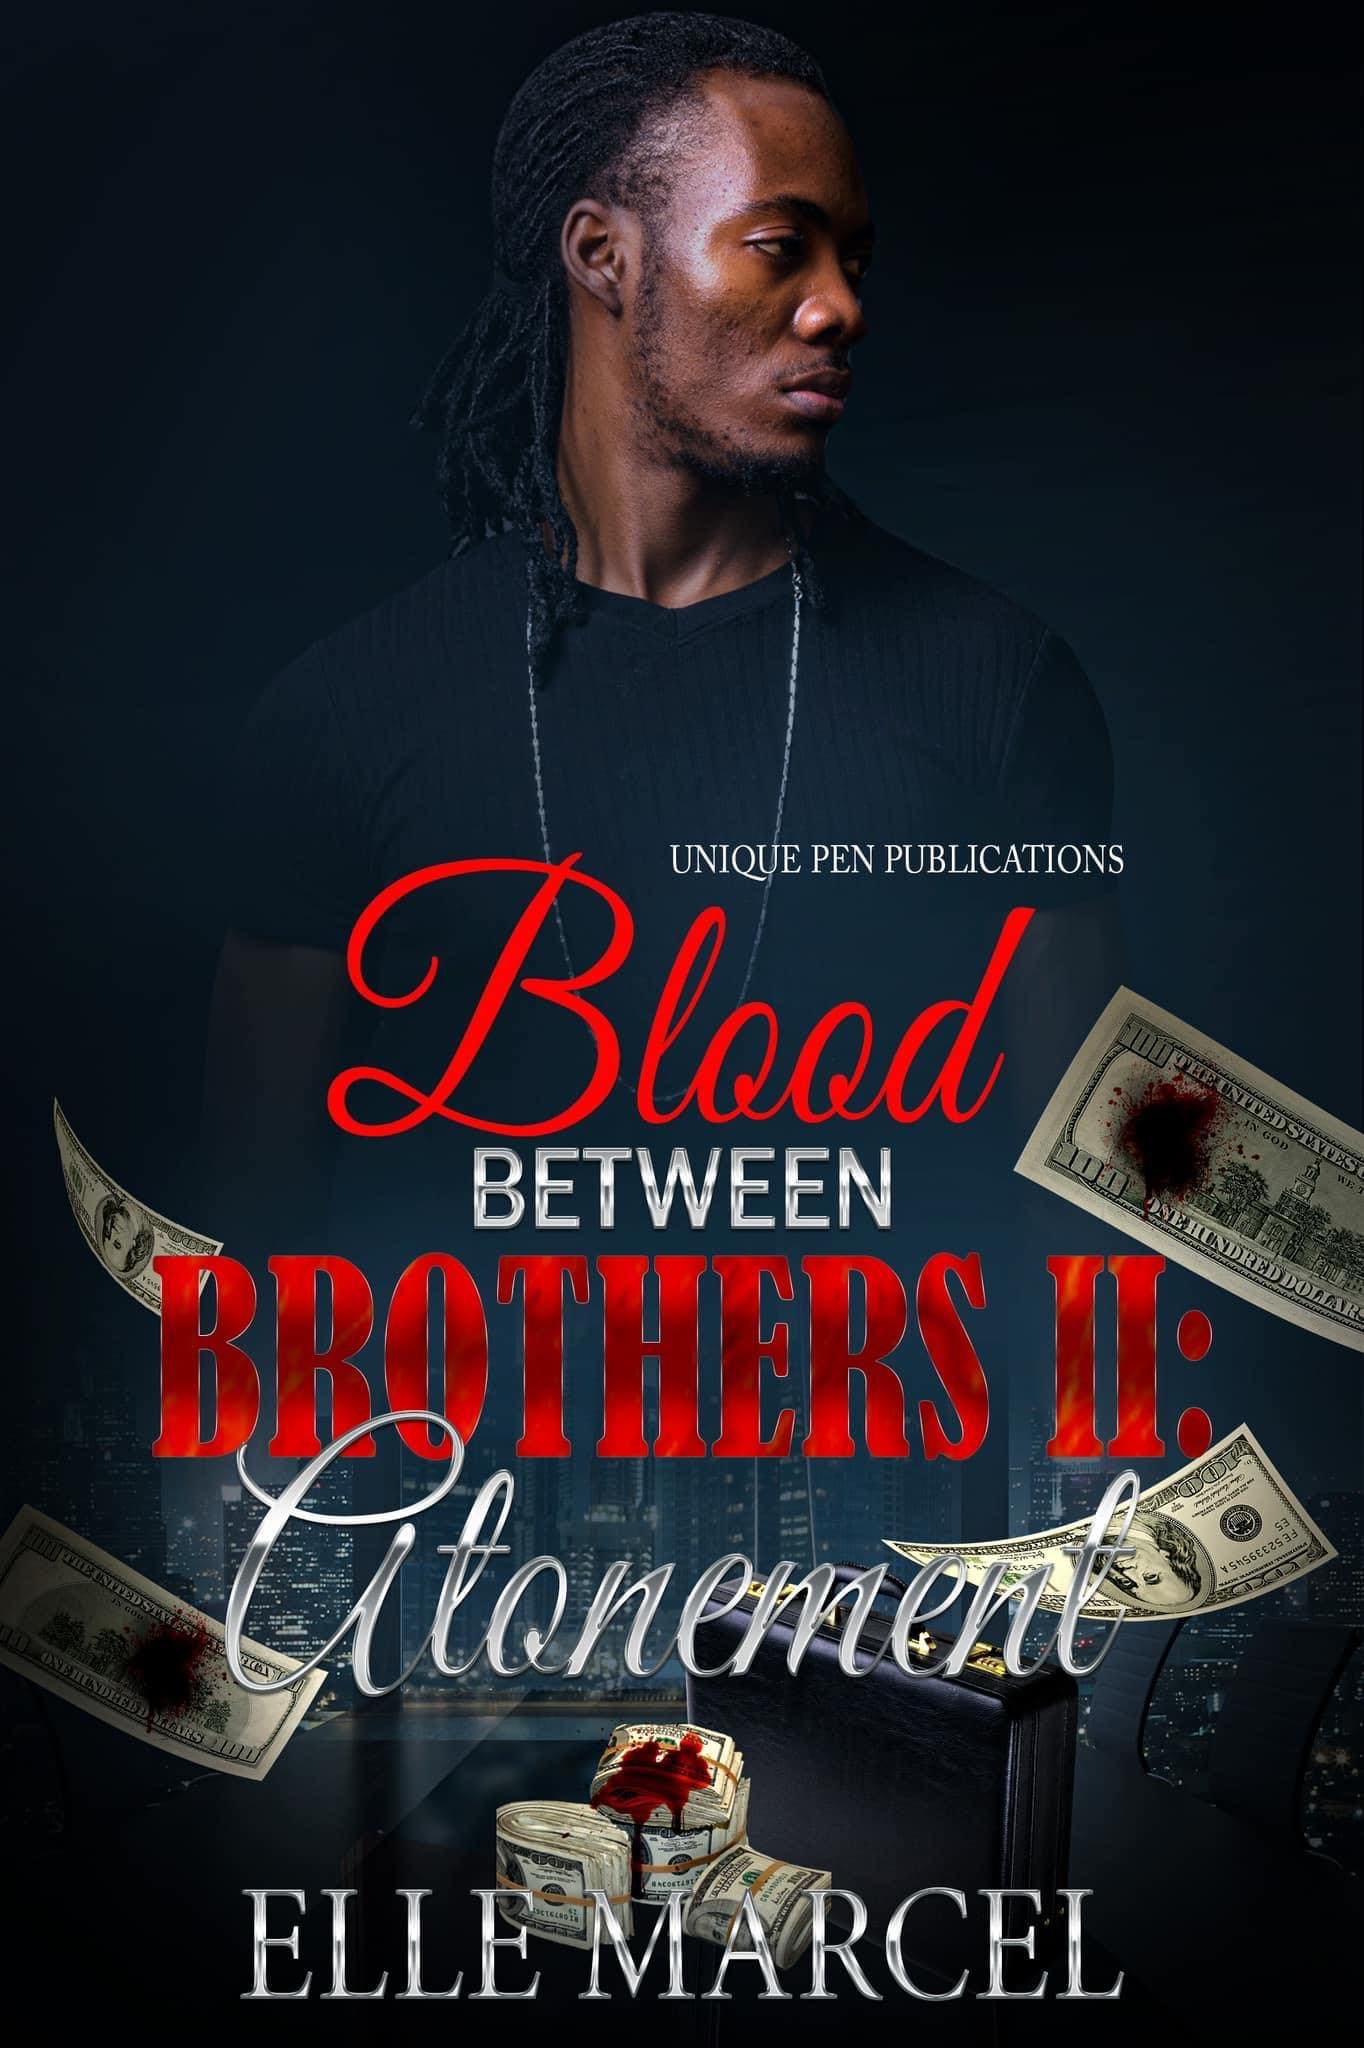 Blood Between Brothers 2 Atonement by Elle Marcel.jpeg